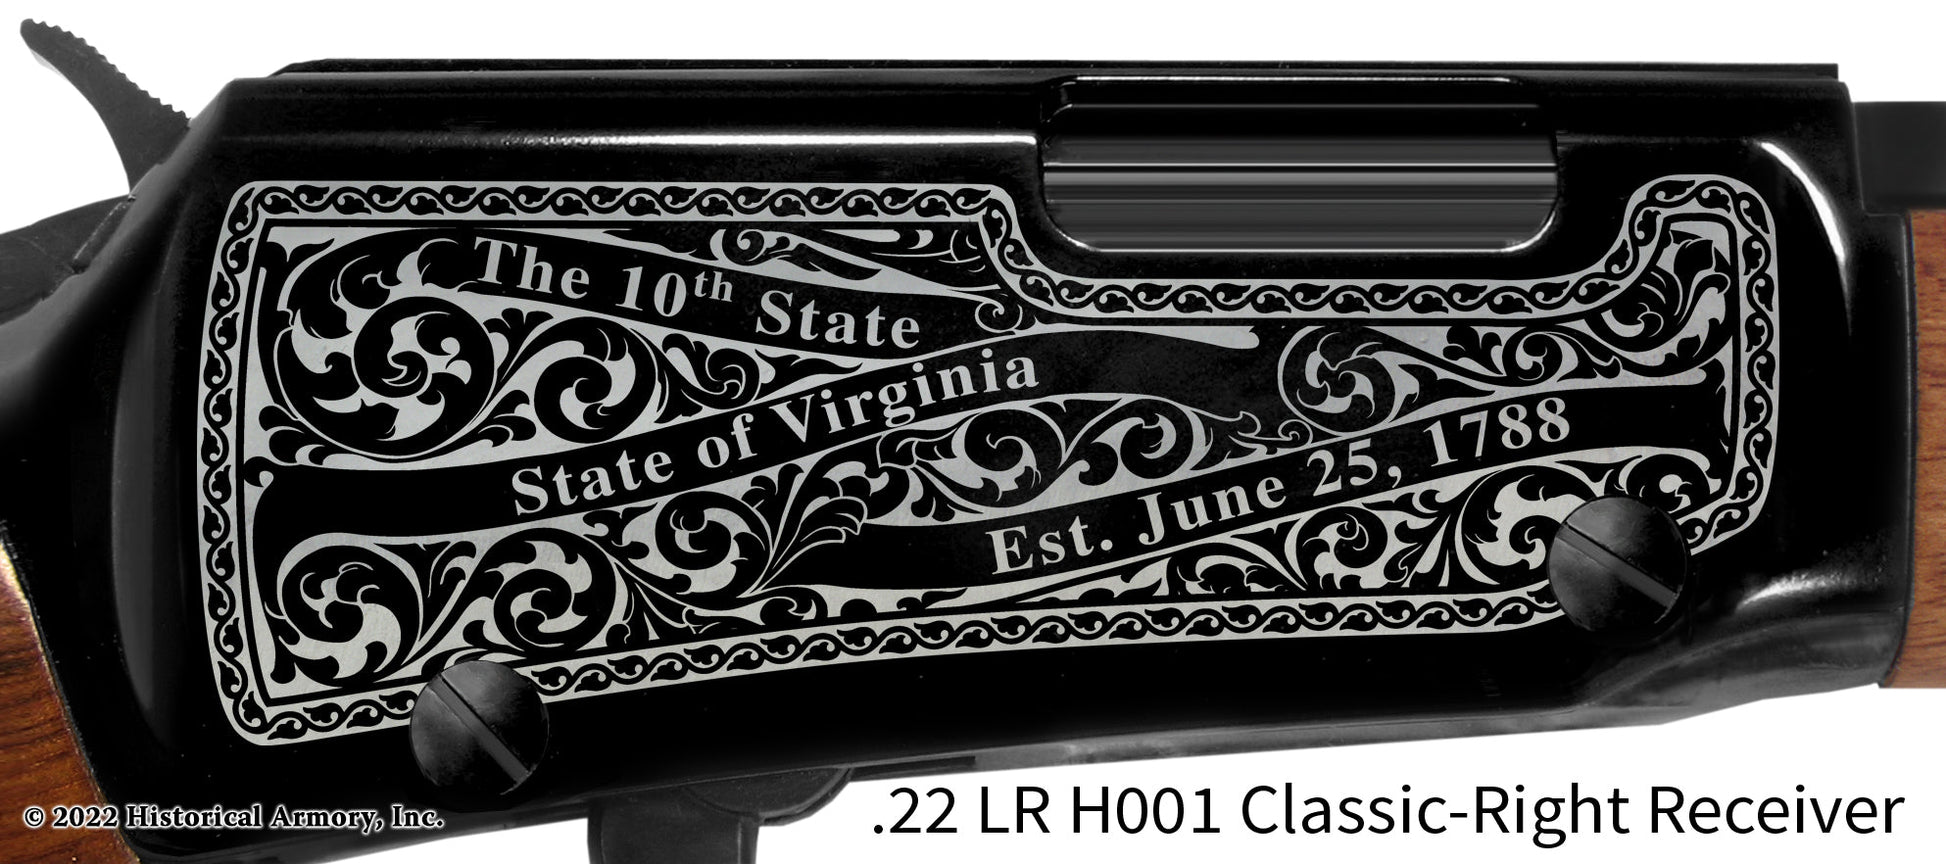 Charlotte County Virginia Engraved Henry H001 Rifle